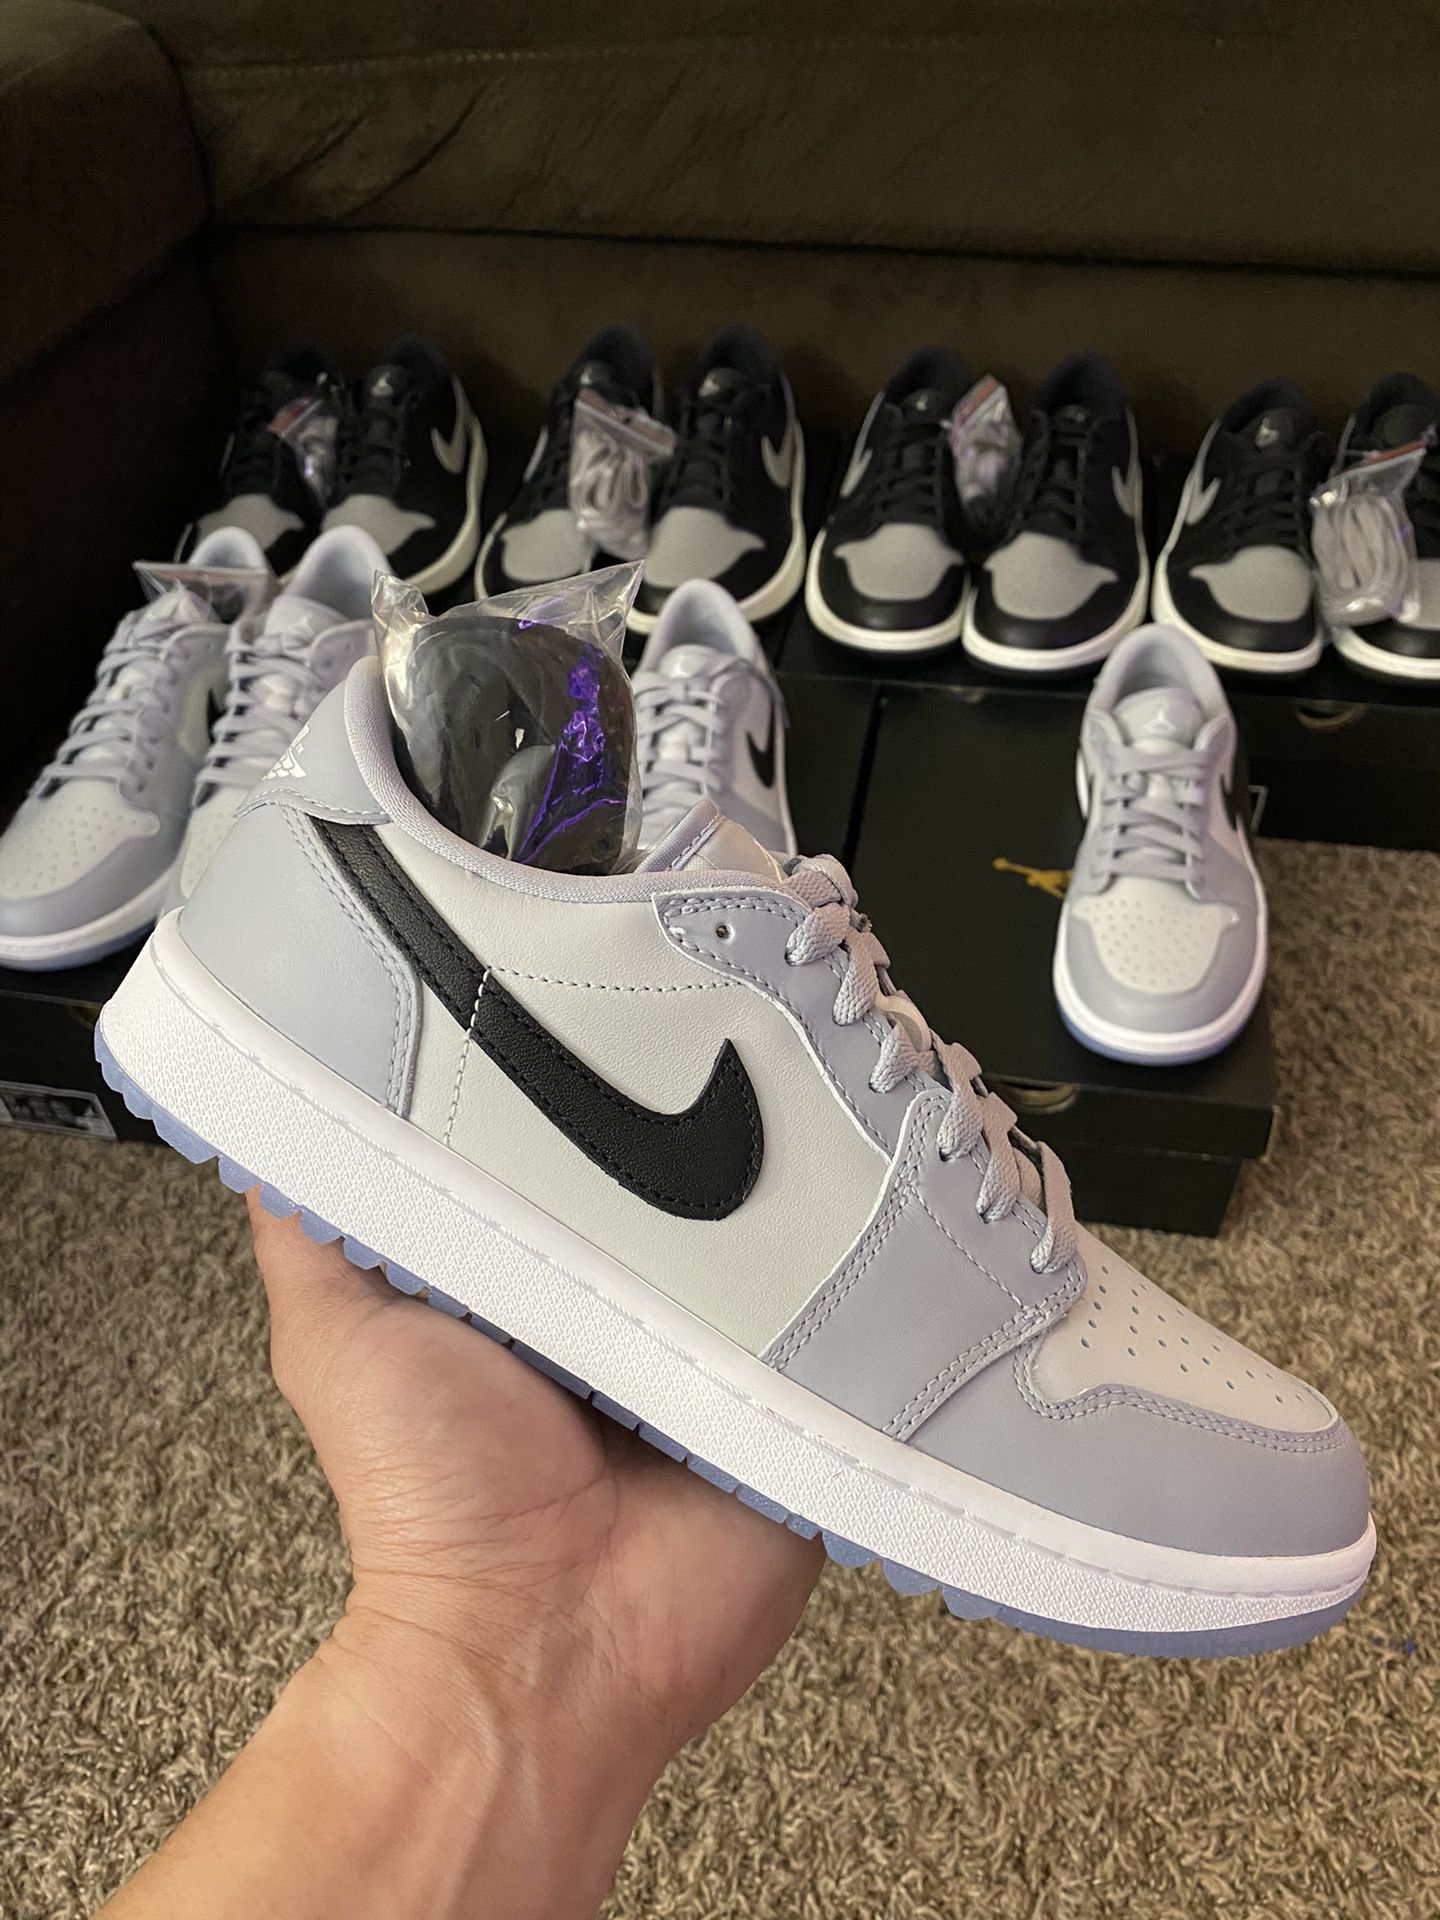 Jordan 1 Retro Low Golf Wolf Grey - size 8, 13 Shadow - size 7.5, 8, 9.5,  11.5 for Sale in Imperial Beach, CA - OfferUp